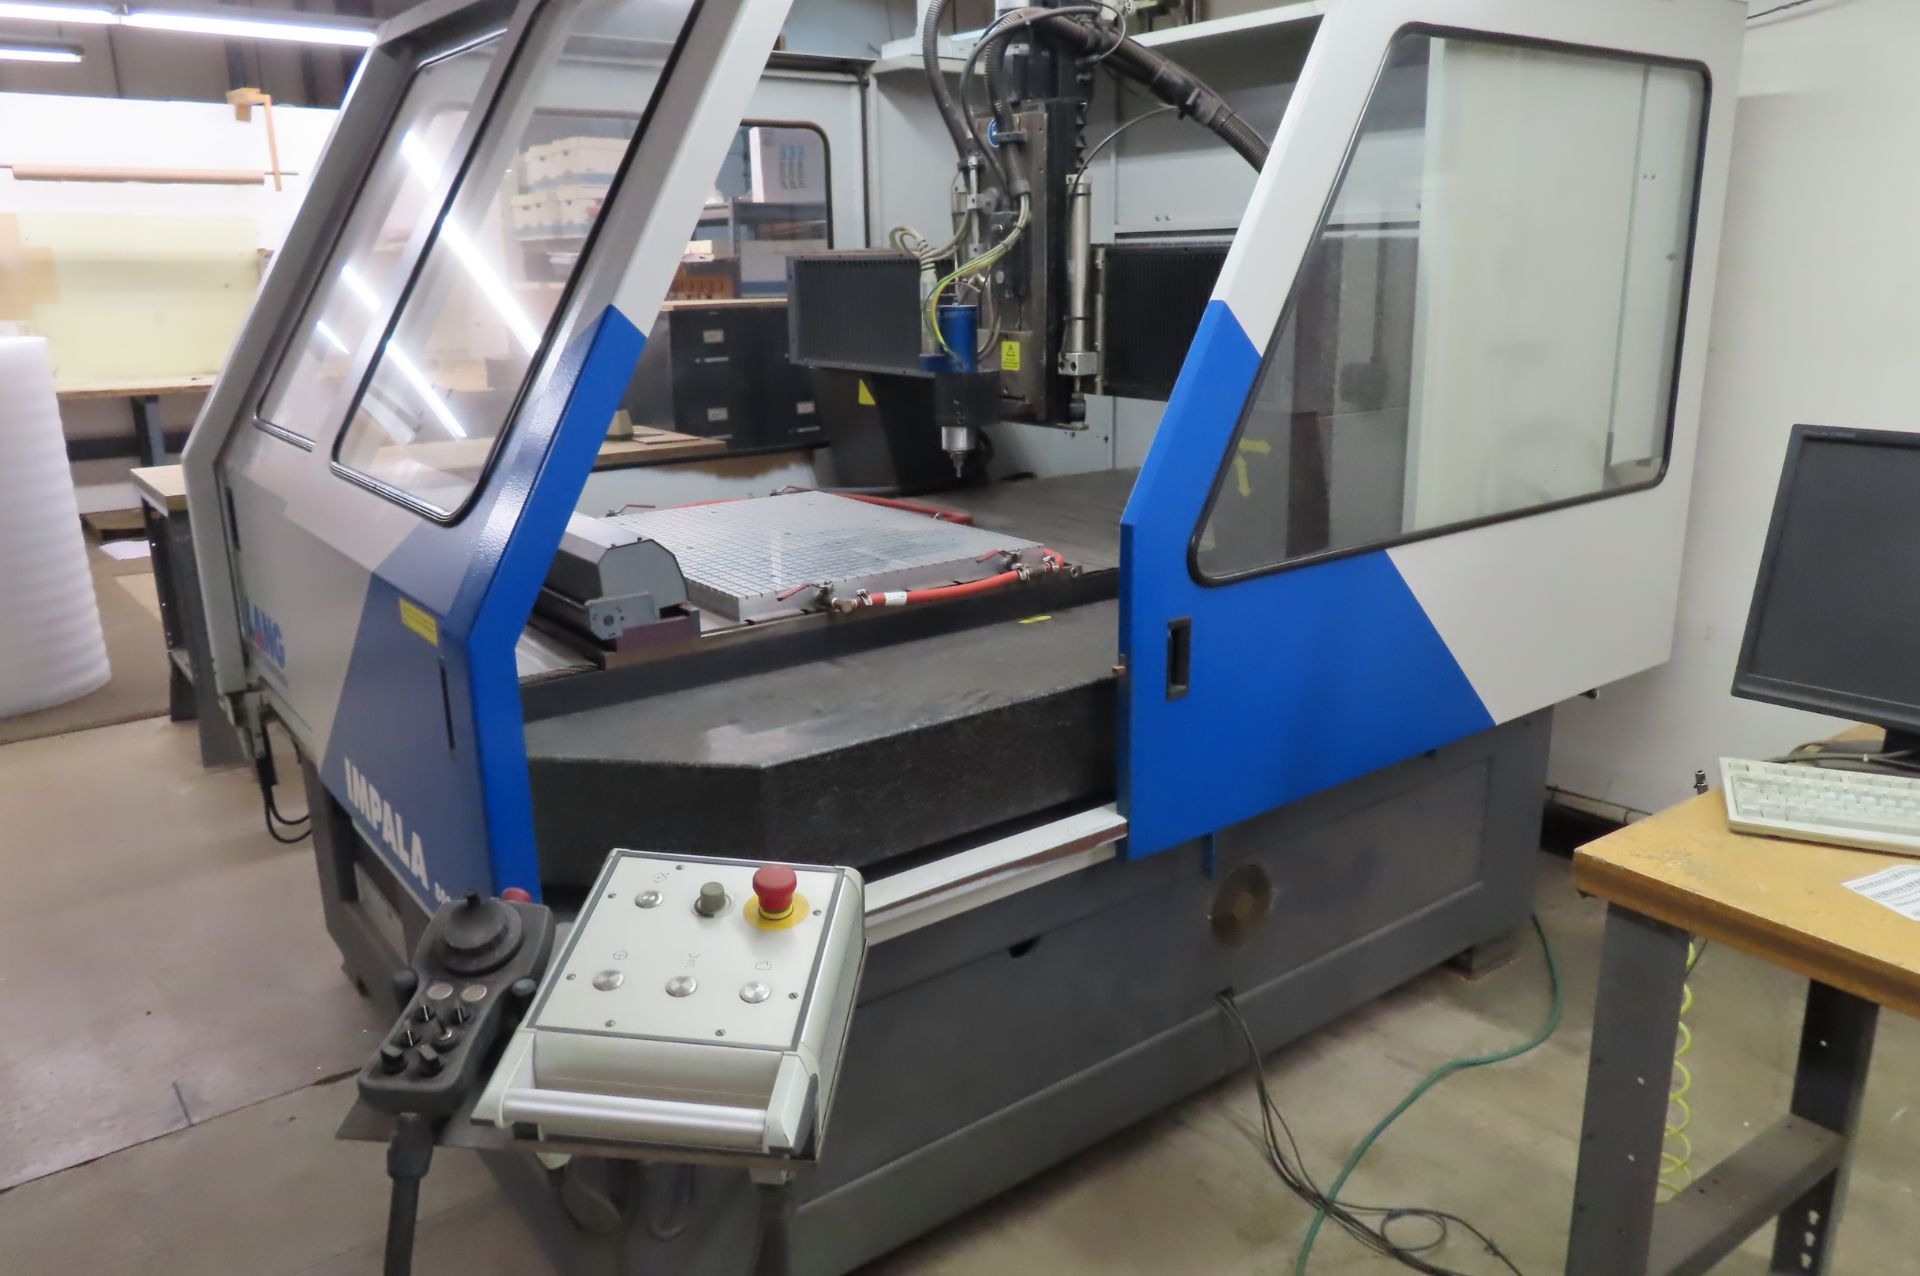 2007 LANG IMPALA 800 CNC ENGRAVING AND MILLING MACHINE, S/N 0709-H530-58, 3 AXIS, X-31 IN... - Image 12 of 16